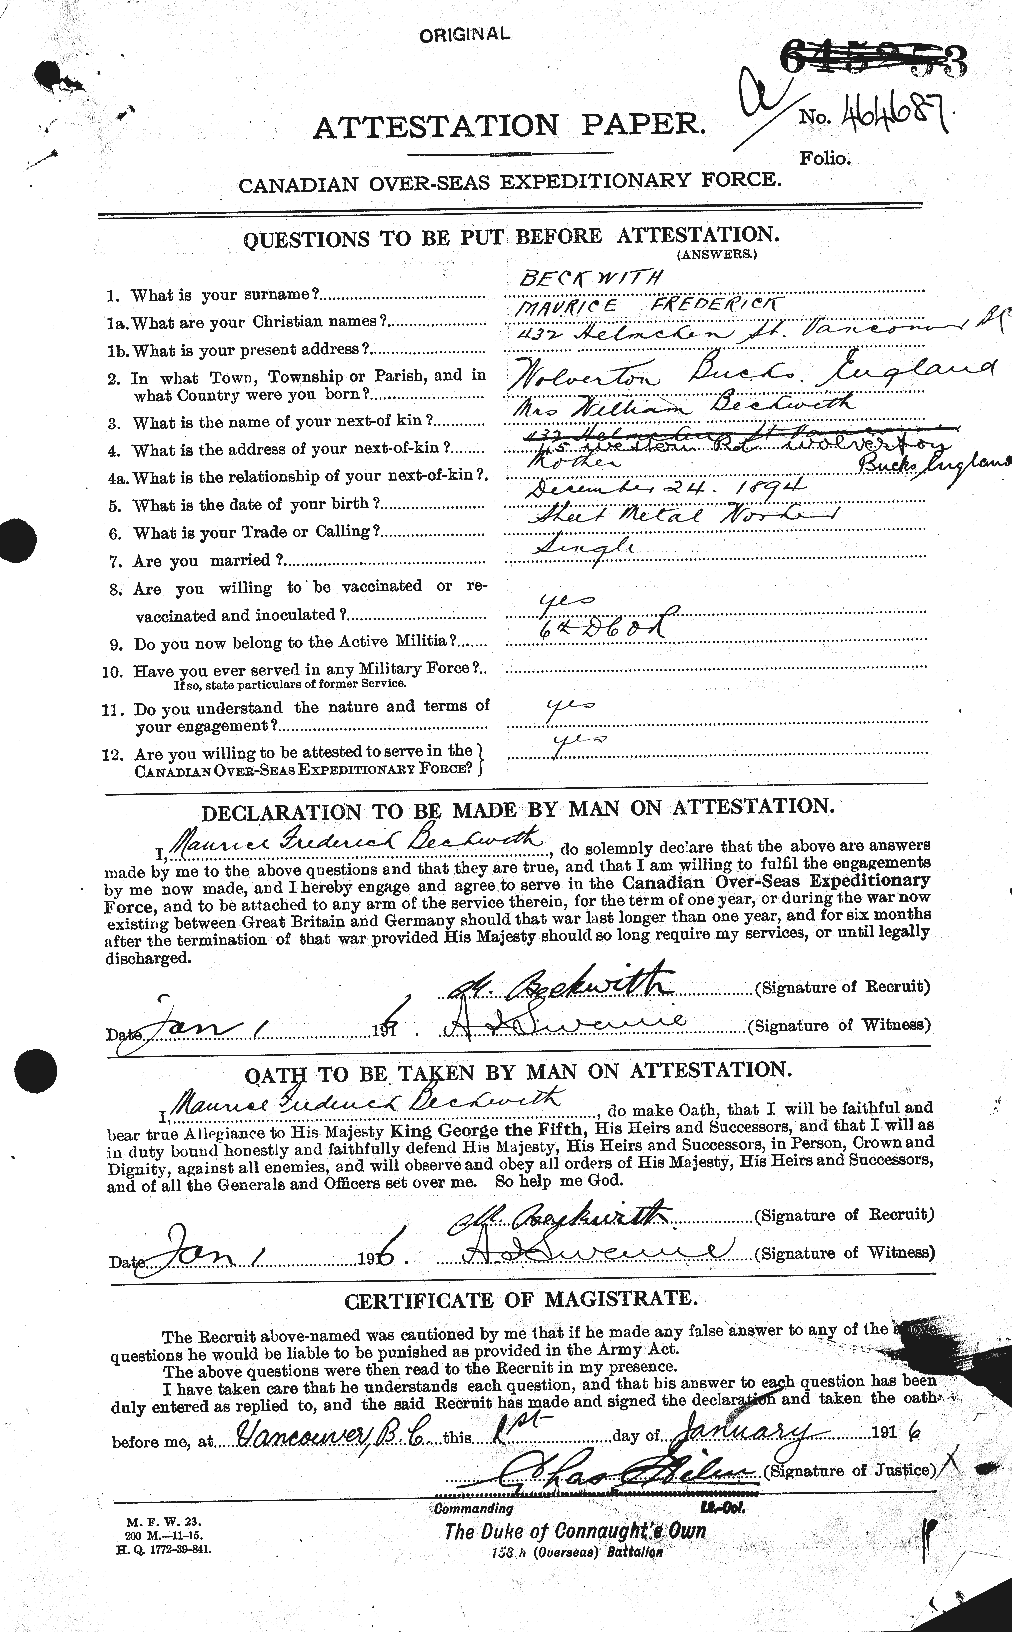 Personnel Records of the First World War - CEF 235922a